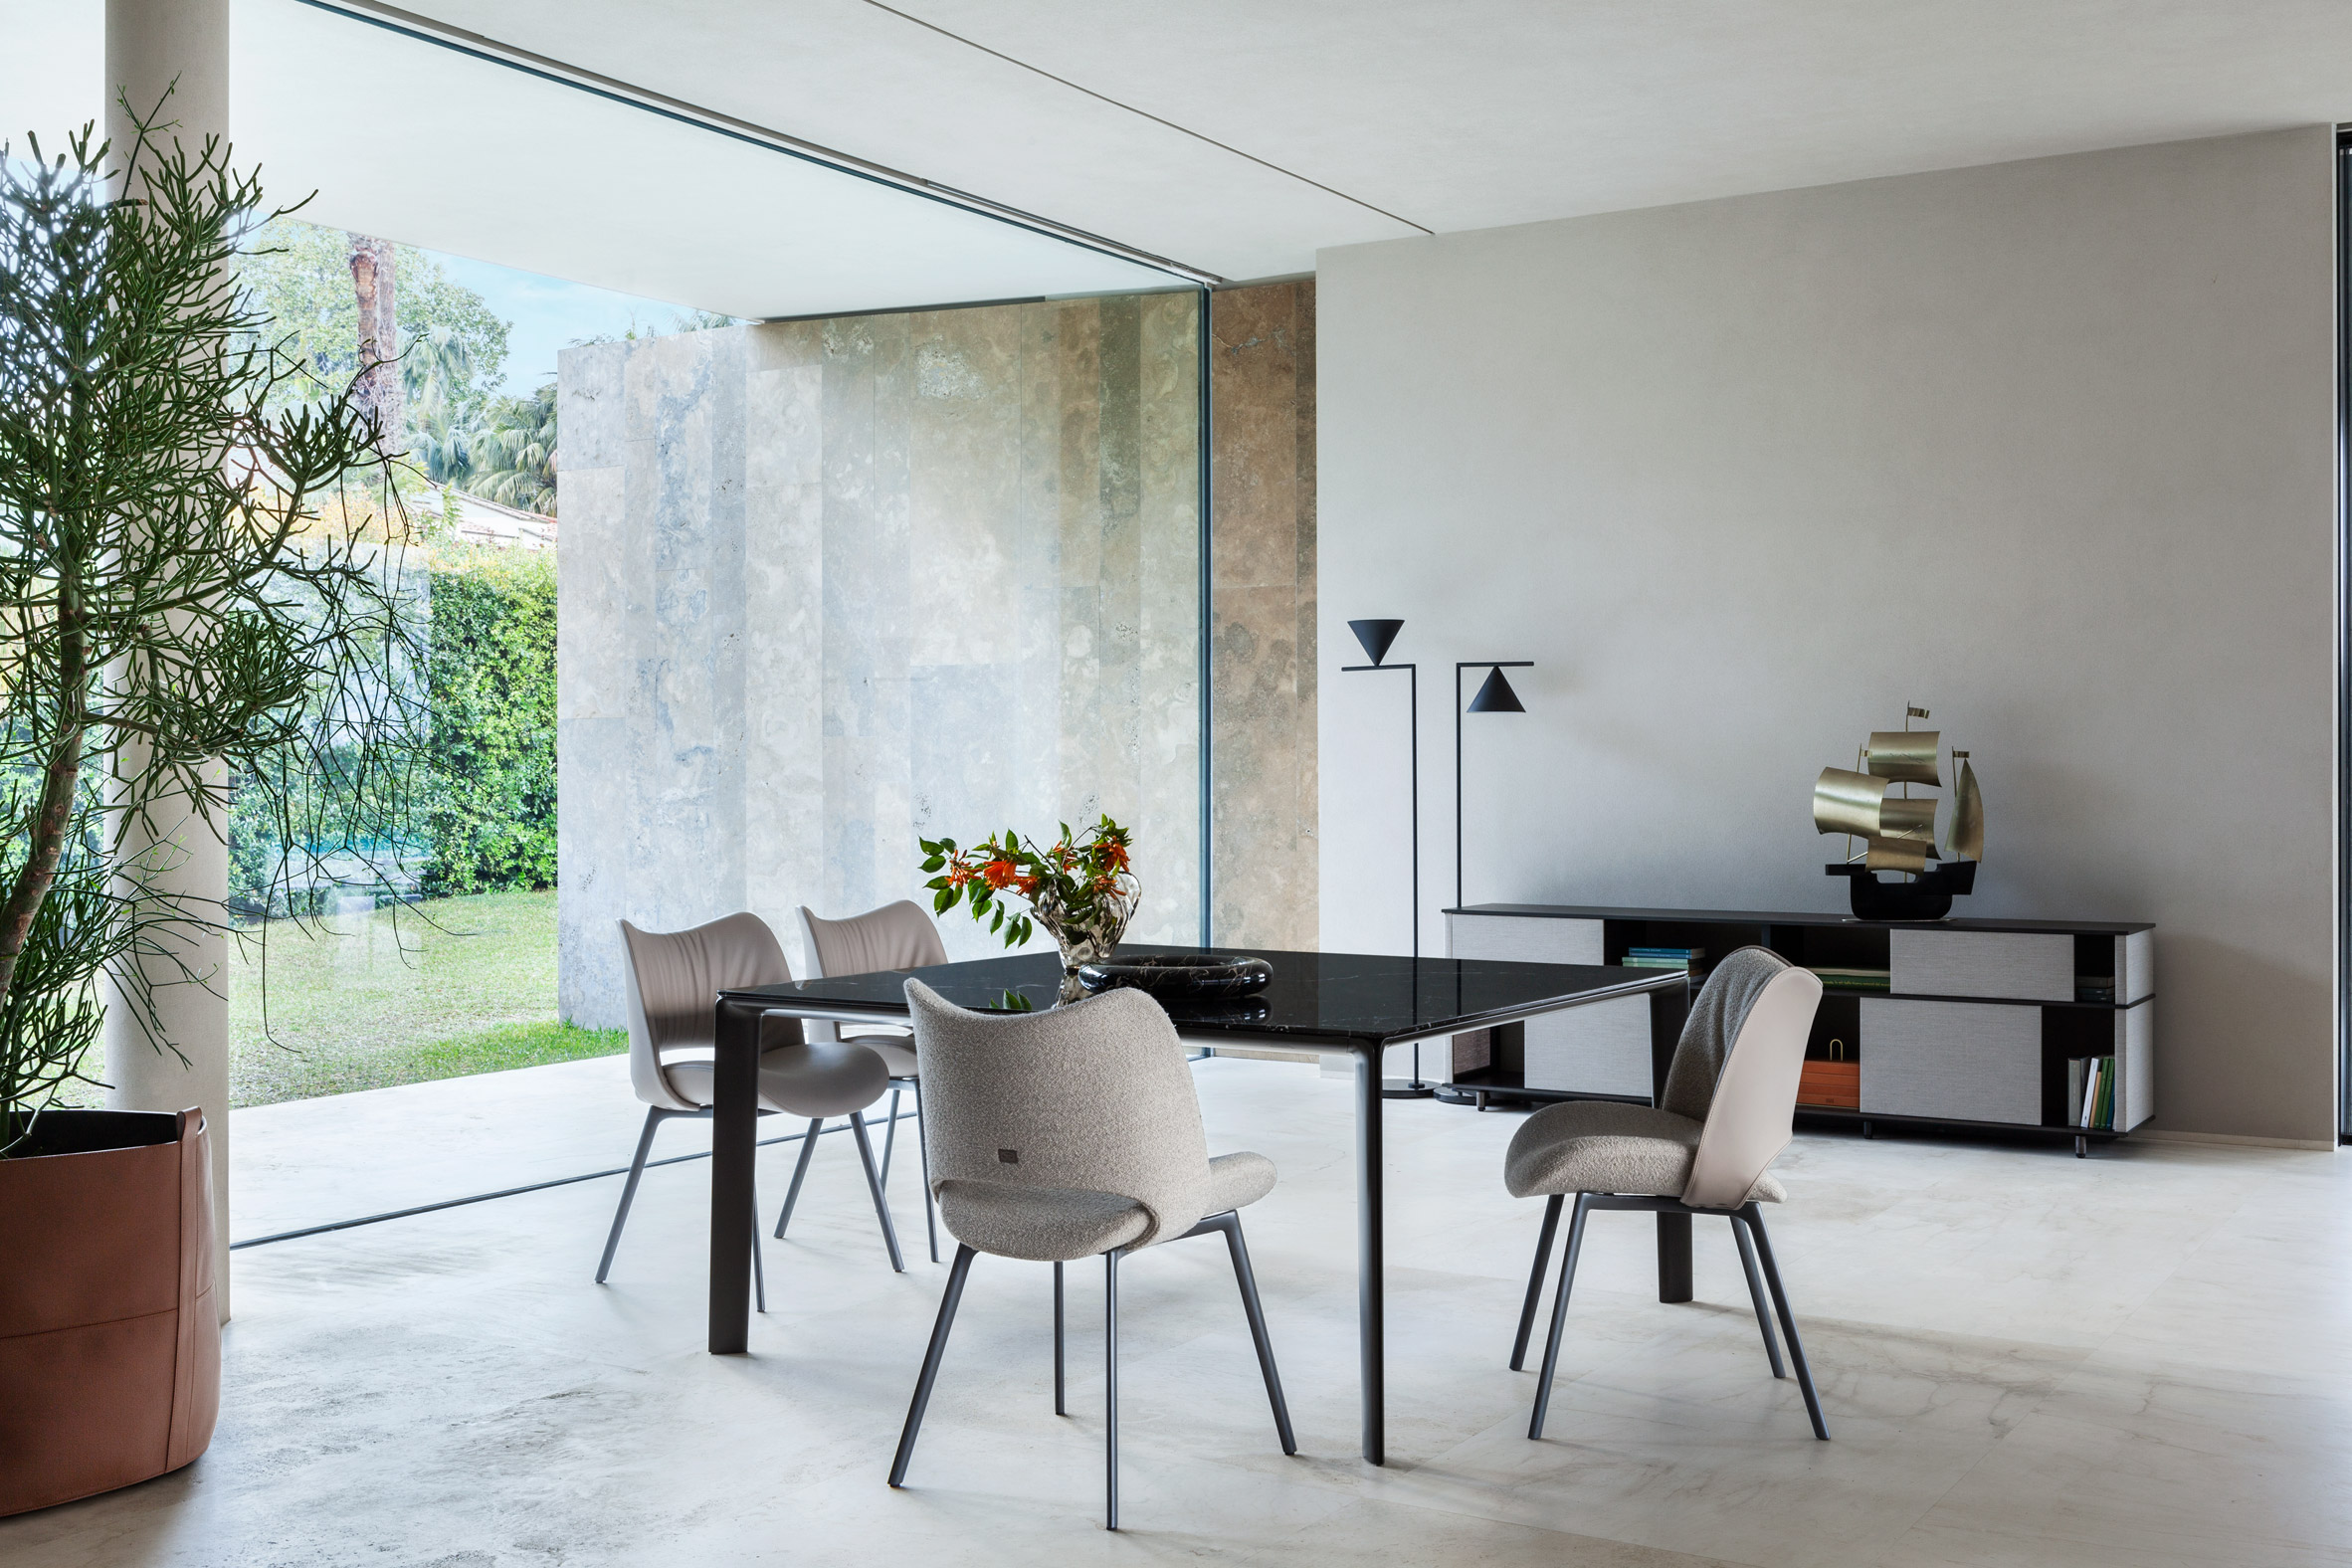 Nice chairs by Poltrona Frau around the Homey table in a concrete room with floor to ceiling glass window